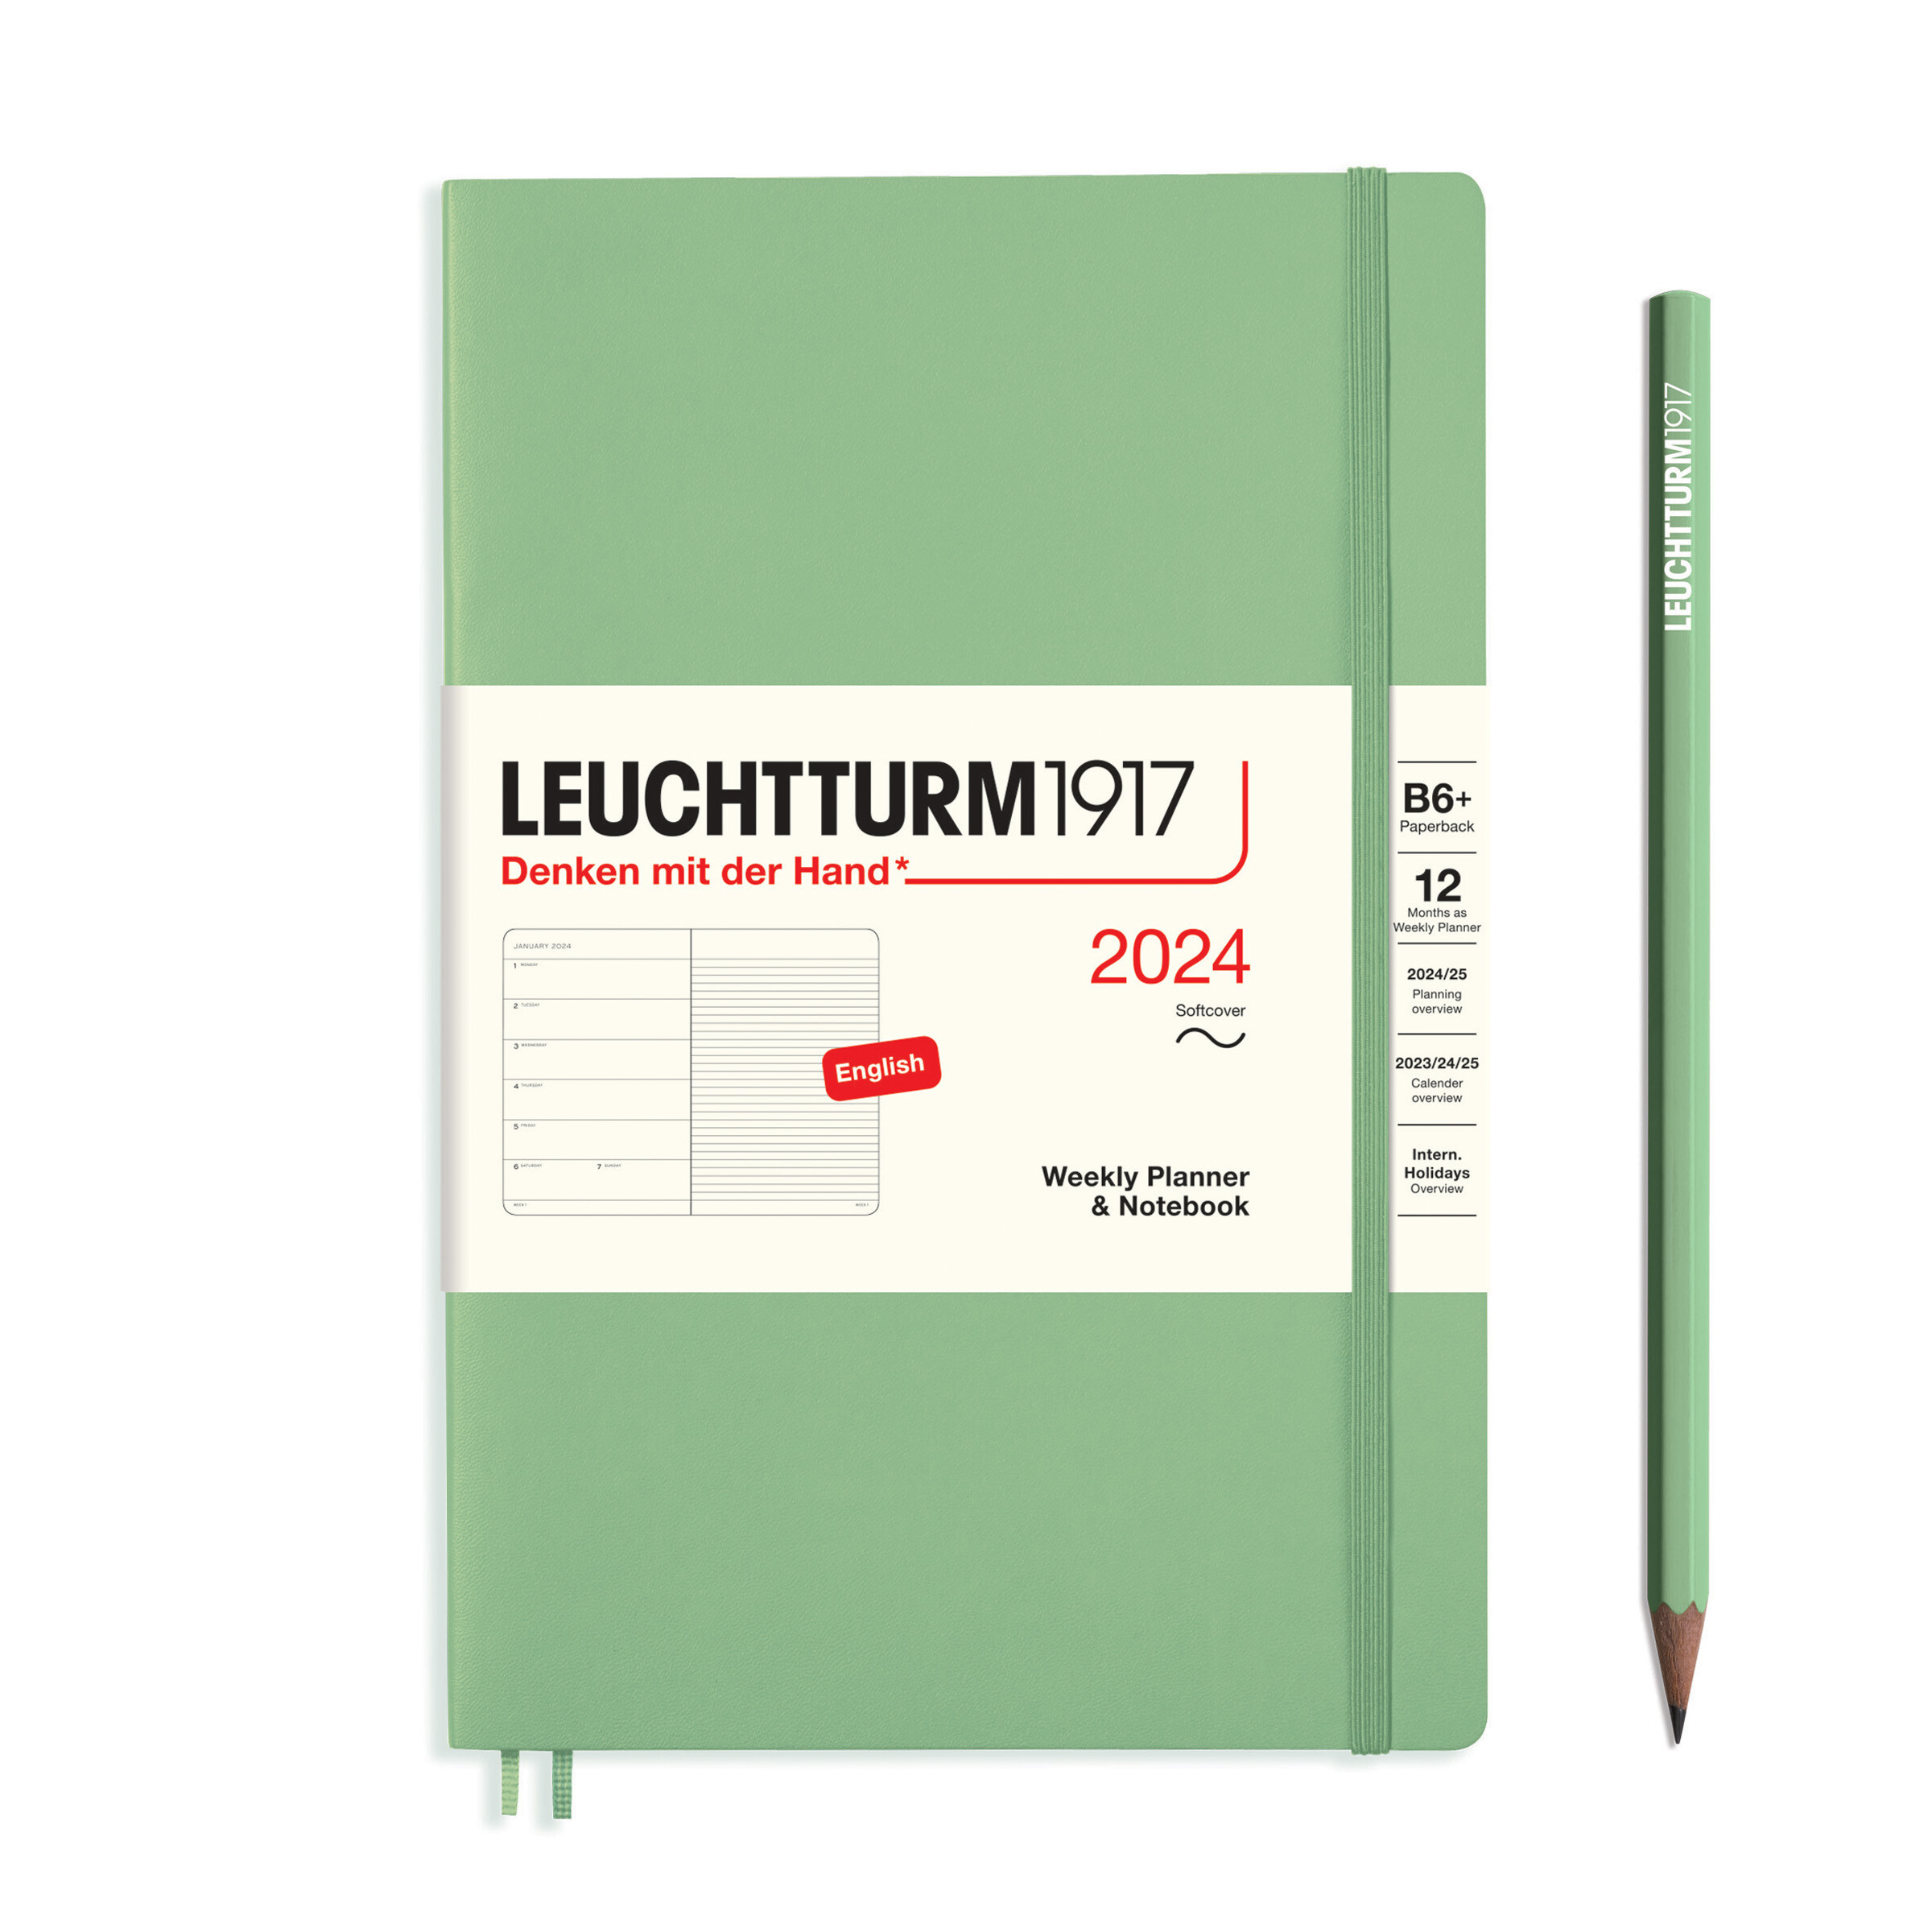 Leuchtturm1917 Weekly Planner & Notebook Soft Cover B6+ 2024 - Pencraft the boutique